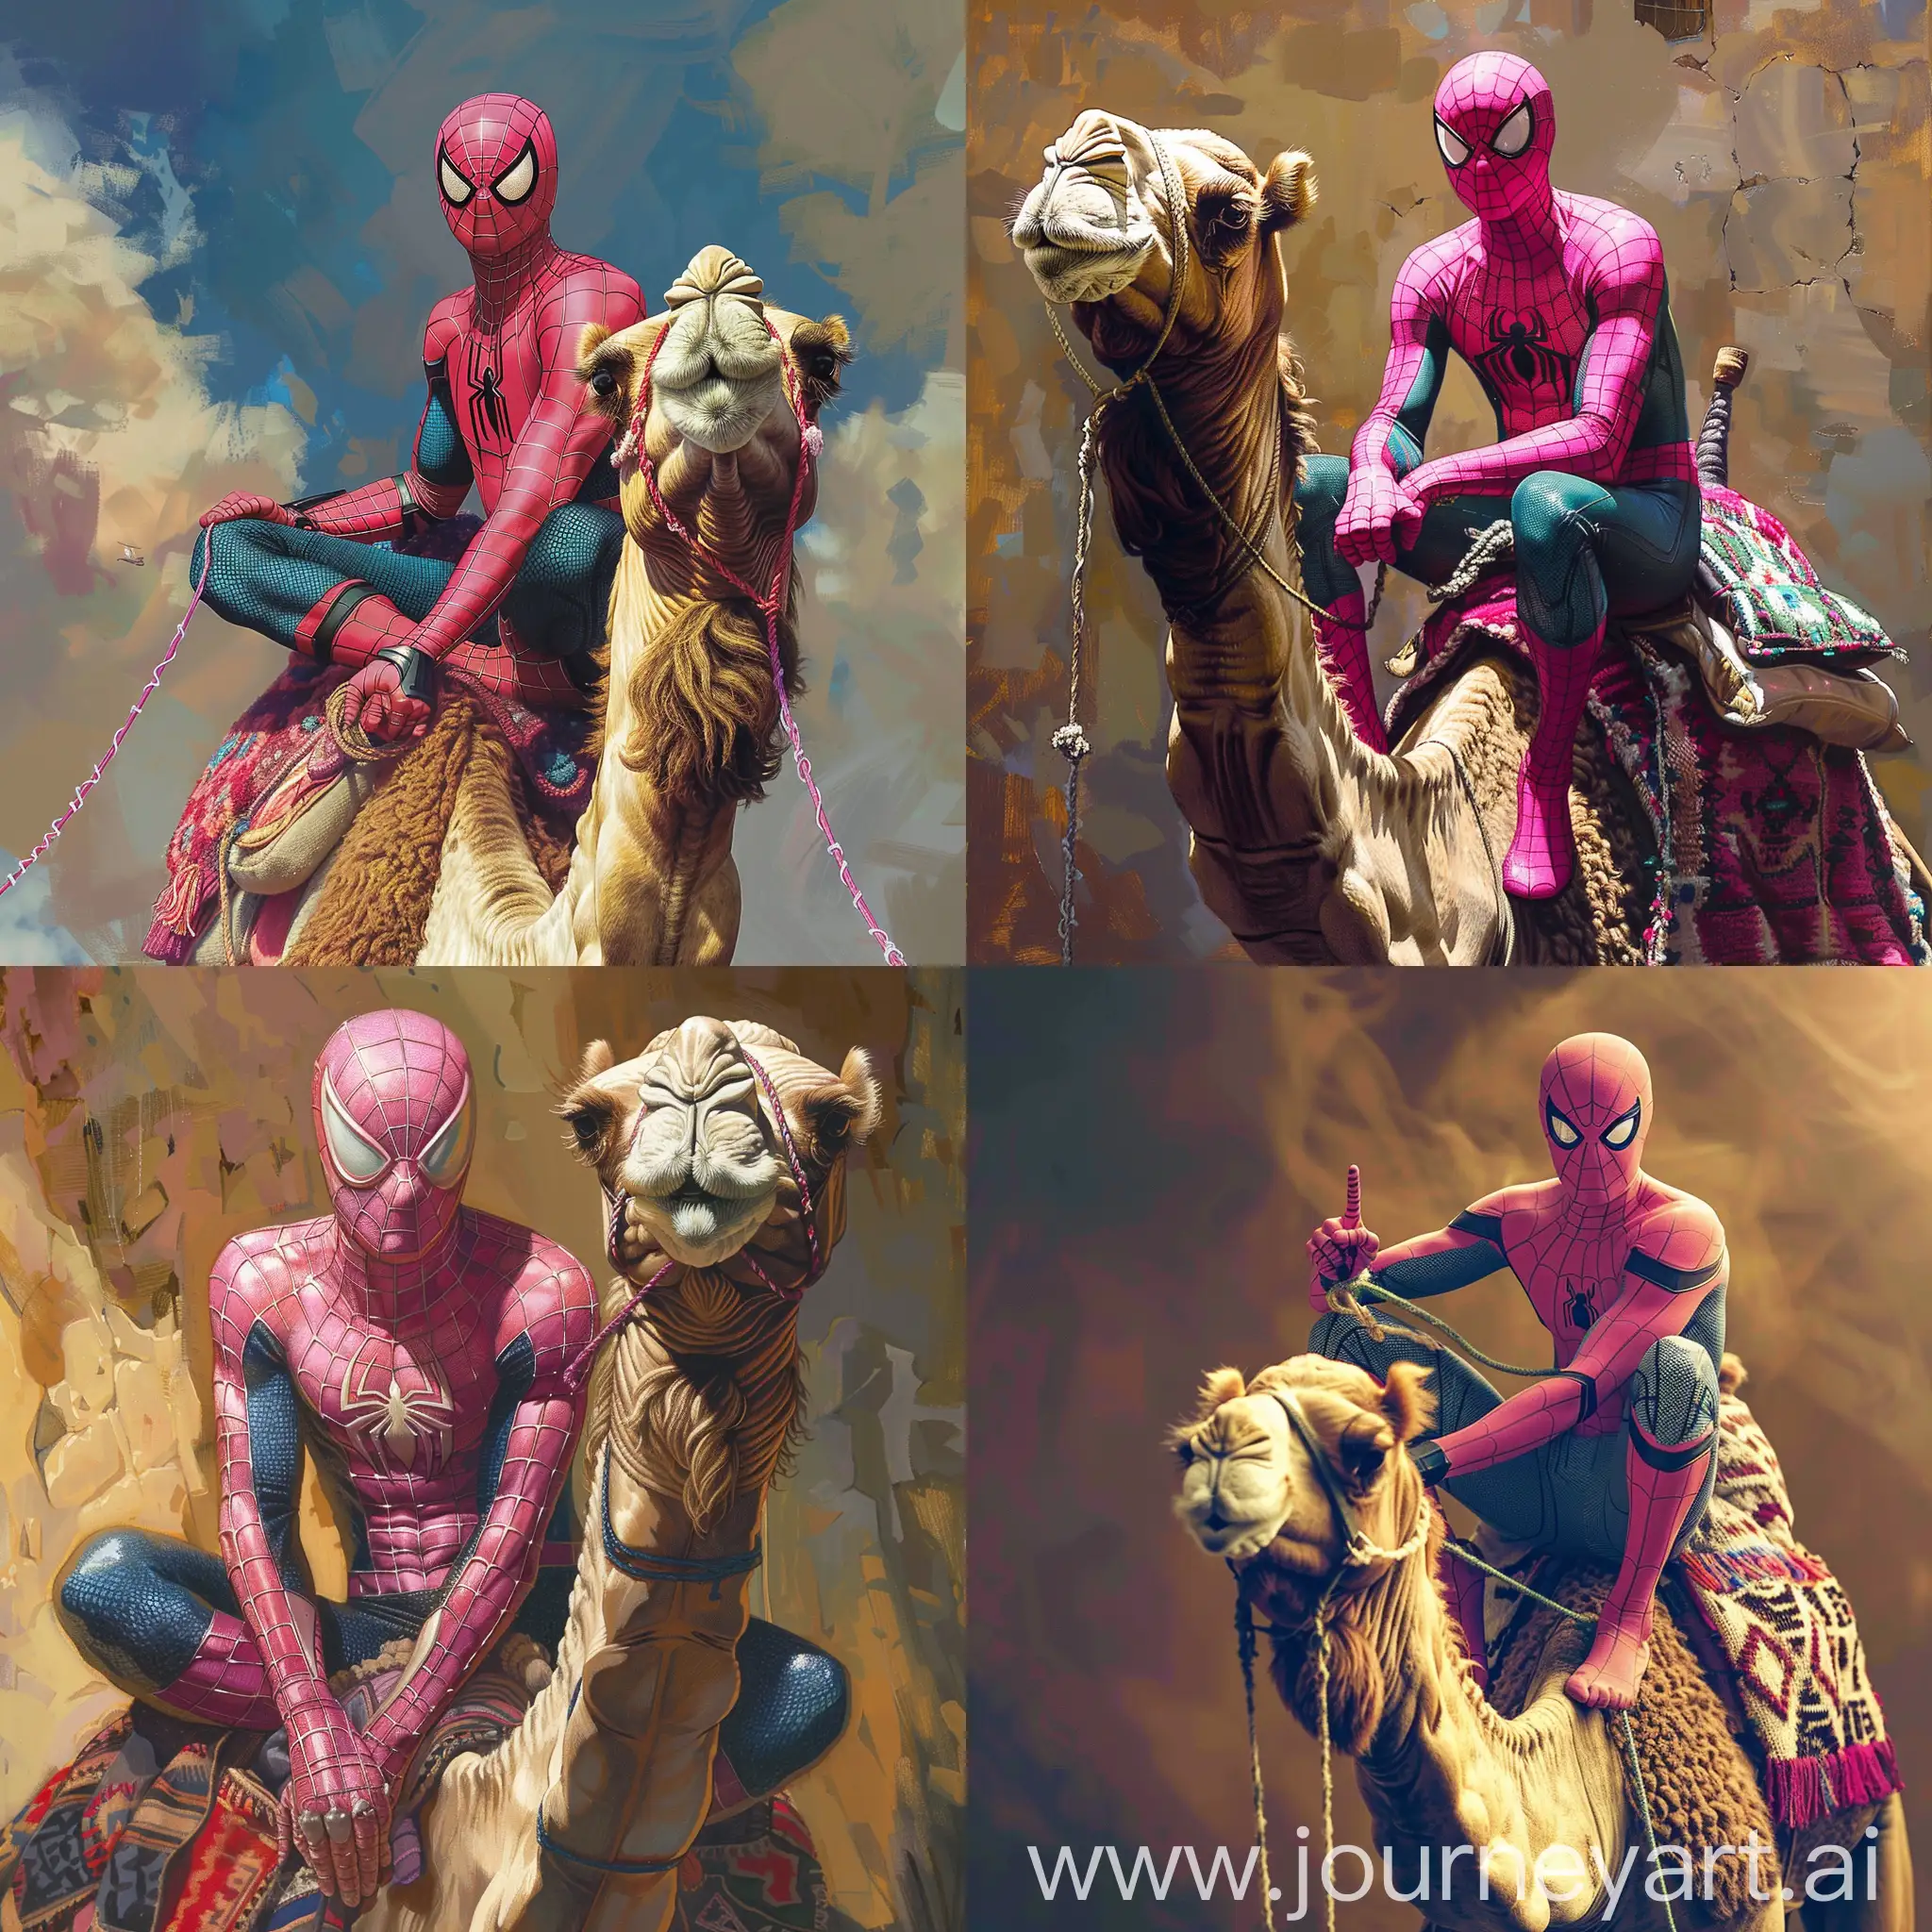 Superhero-in-Desert-Outfit-with-Camel